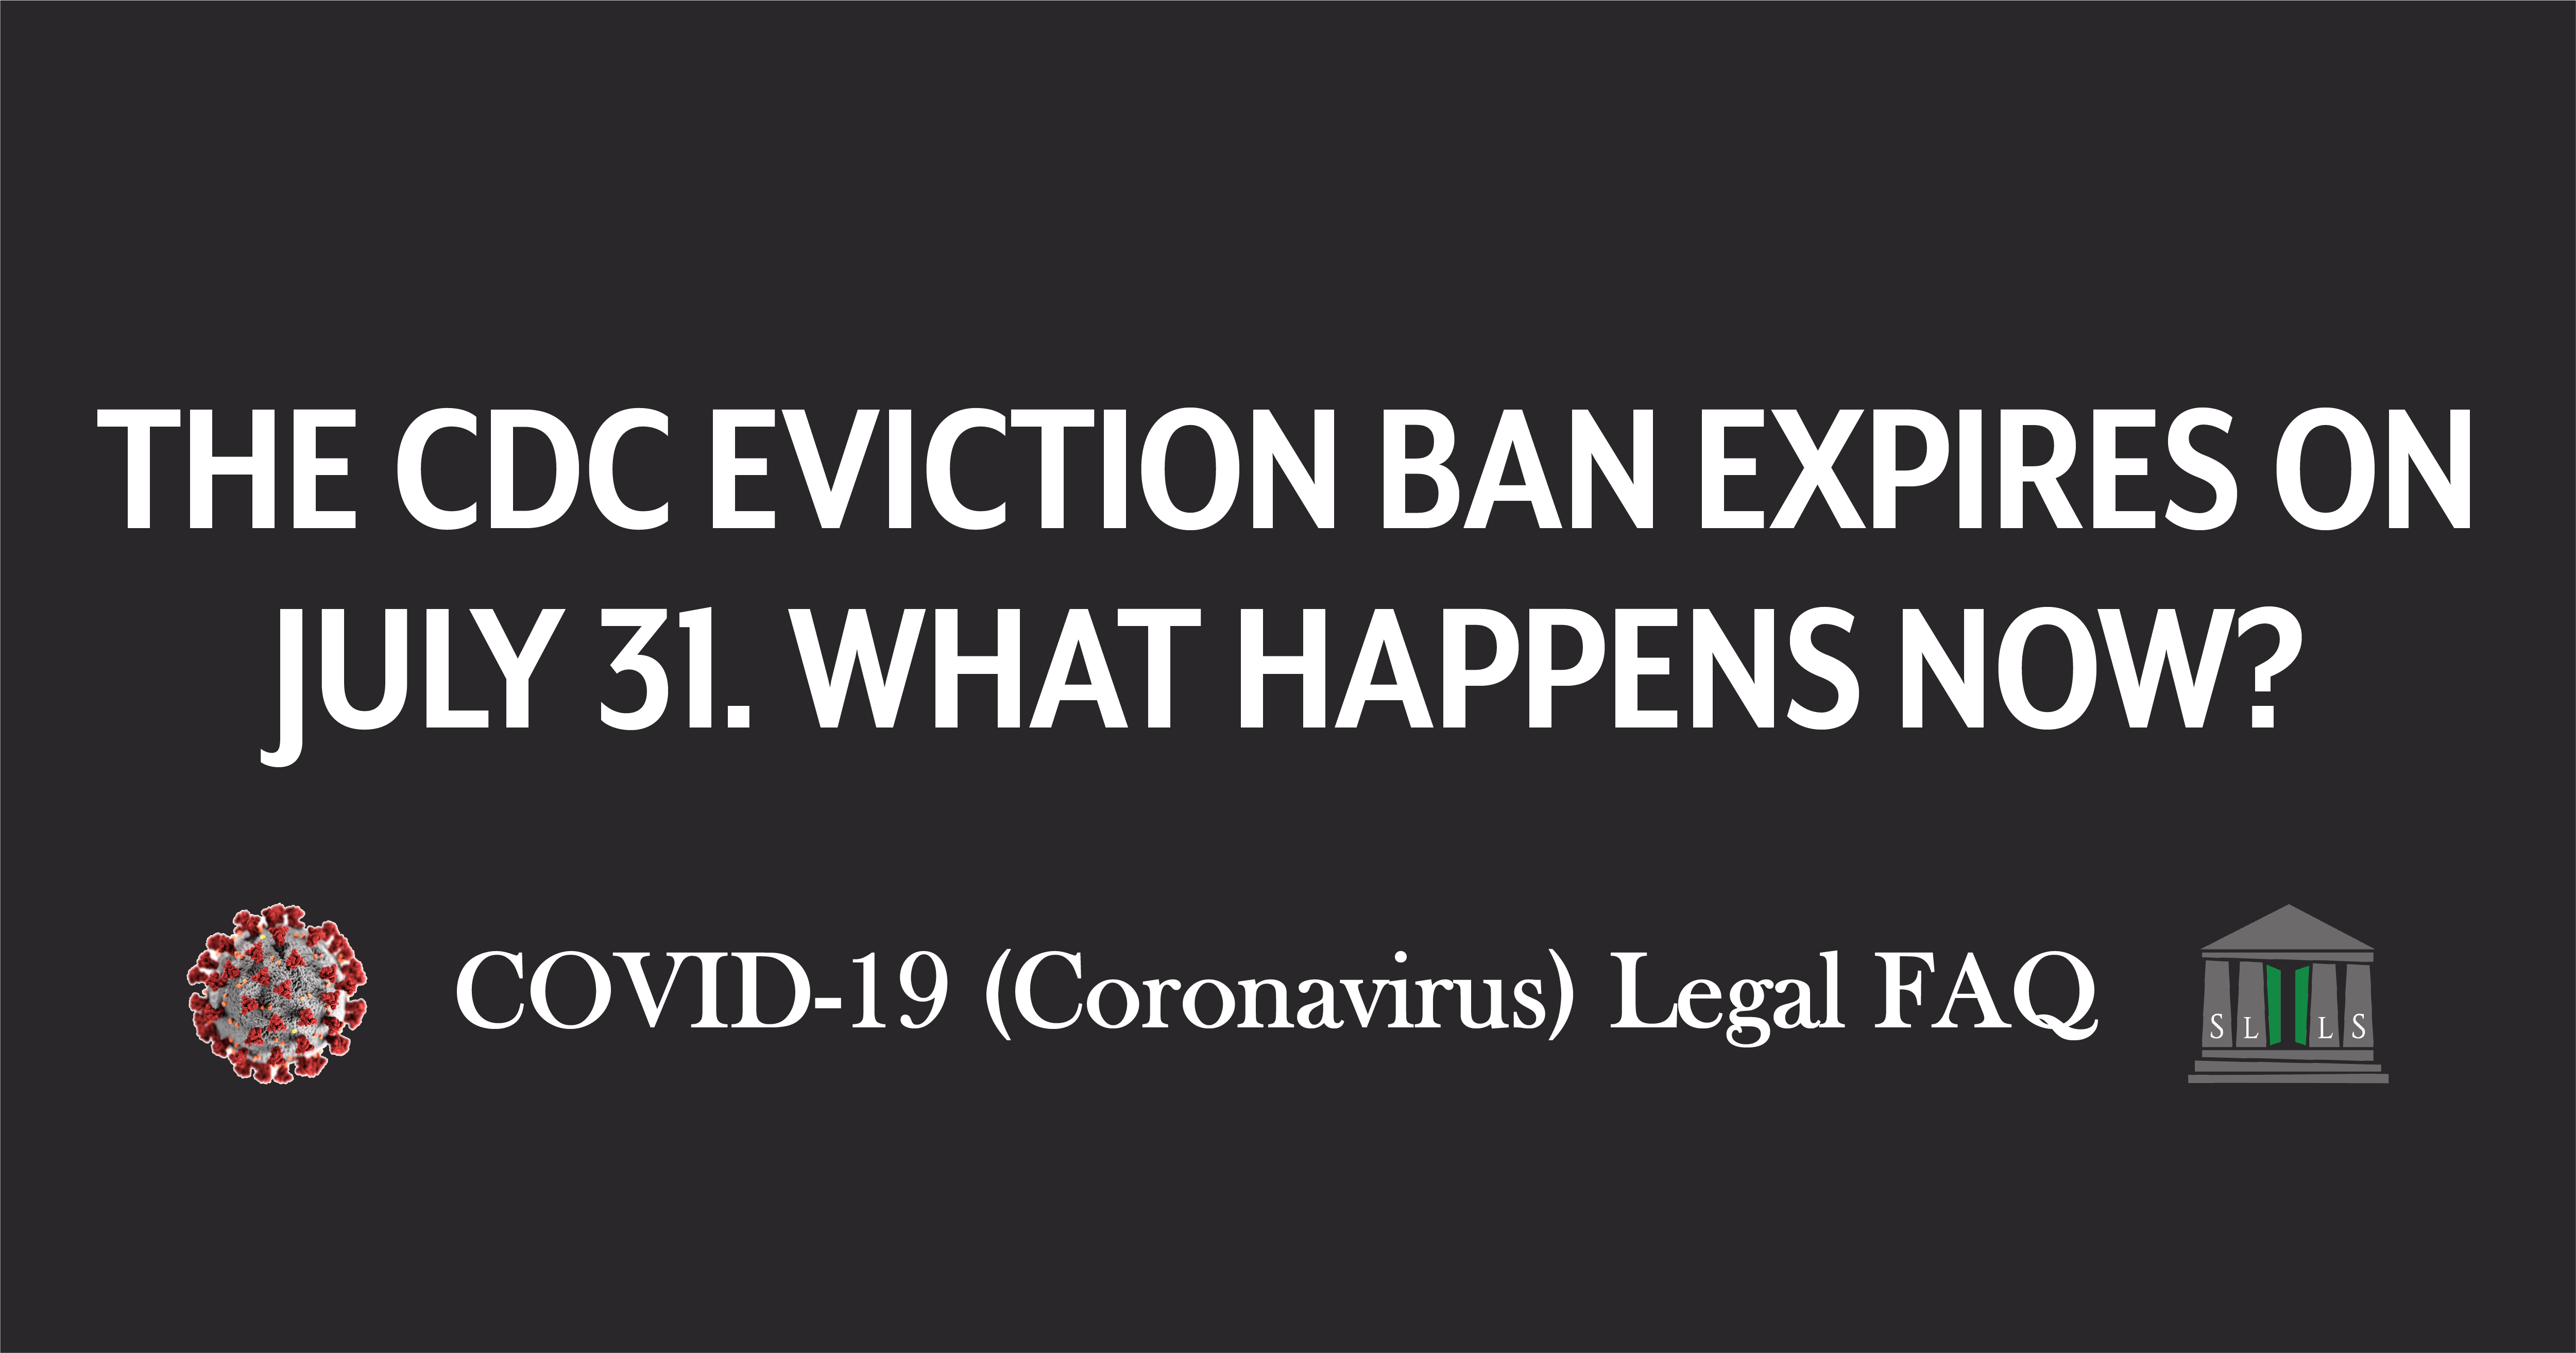 The Cdc Eviction Ban Expires On July 31 What Happens Now Slls